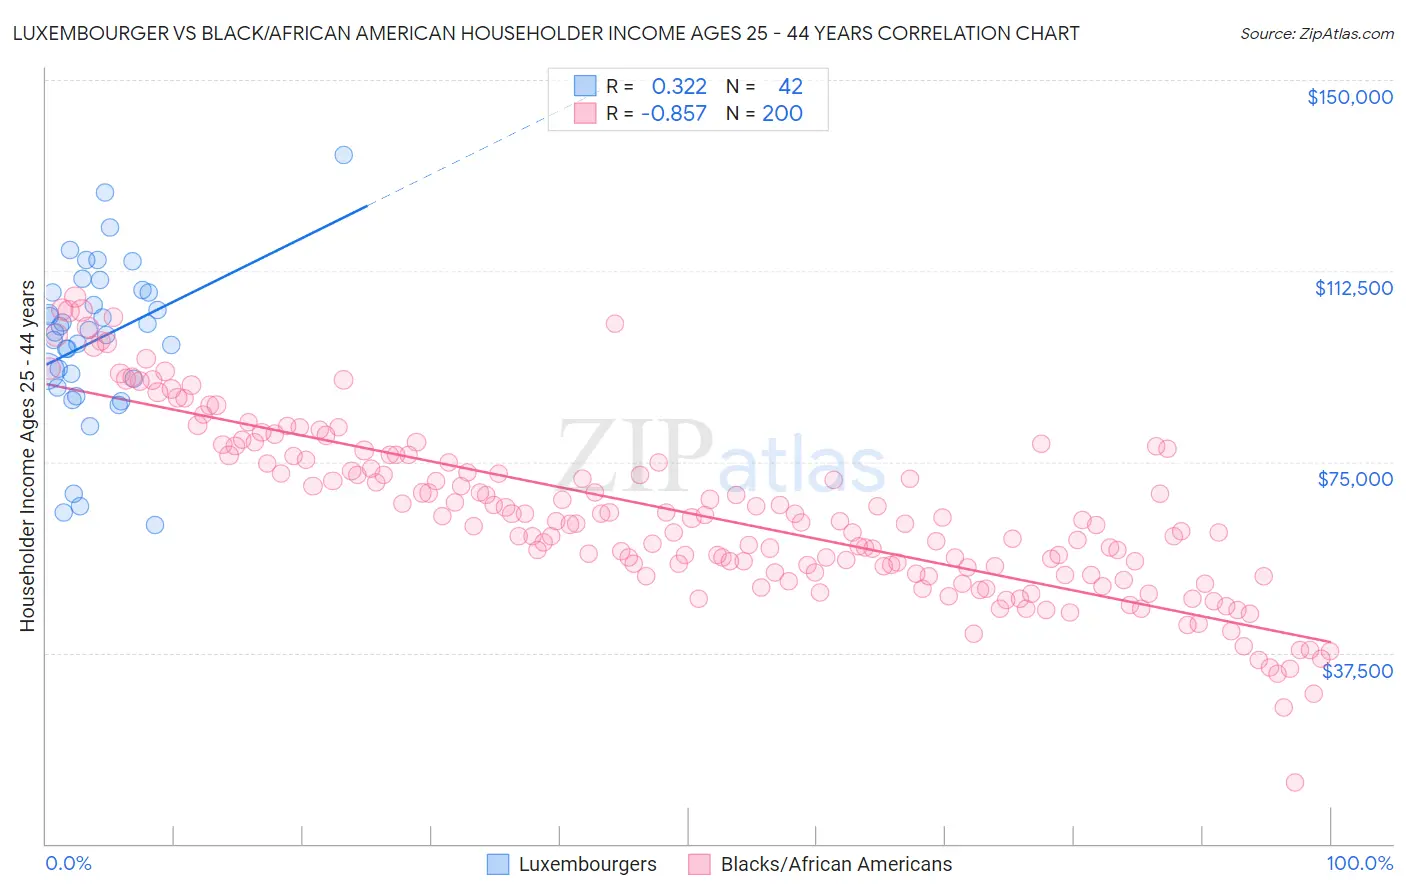 Luxembourger vs Black/African American Householder Income Ages 25 - 44 years